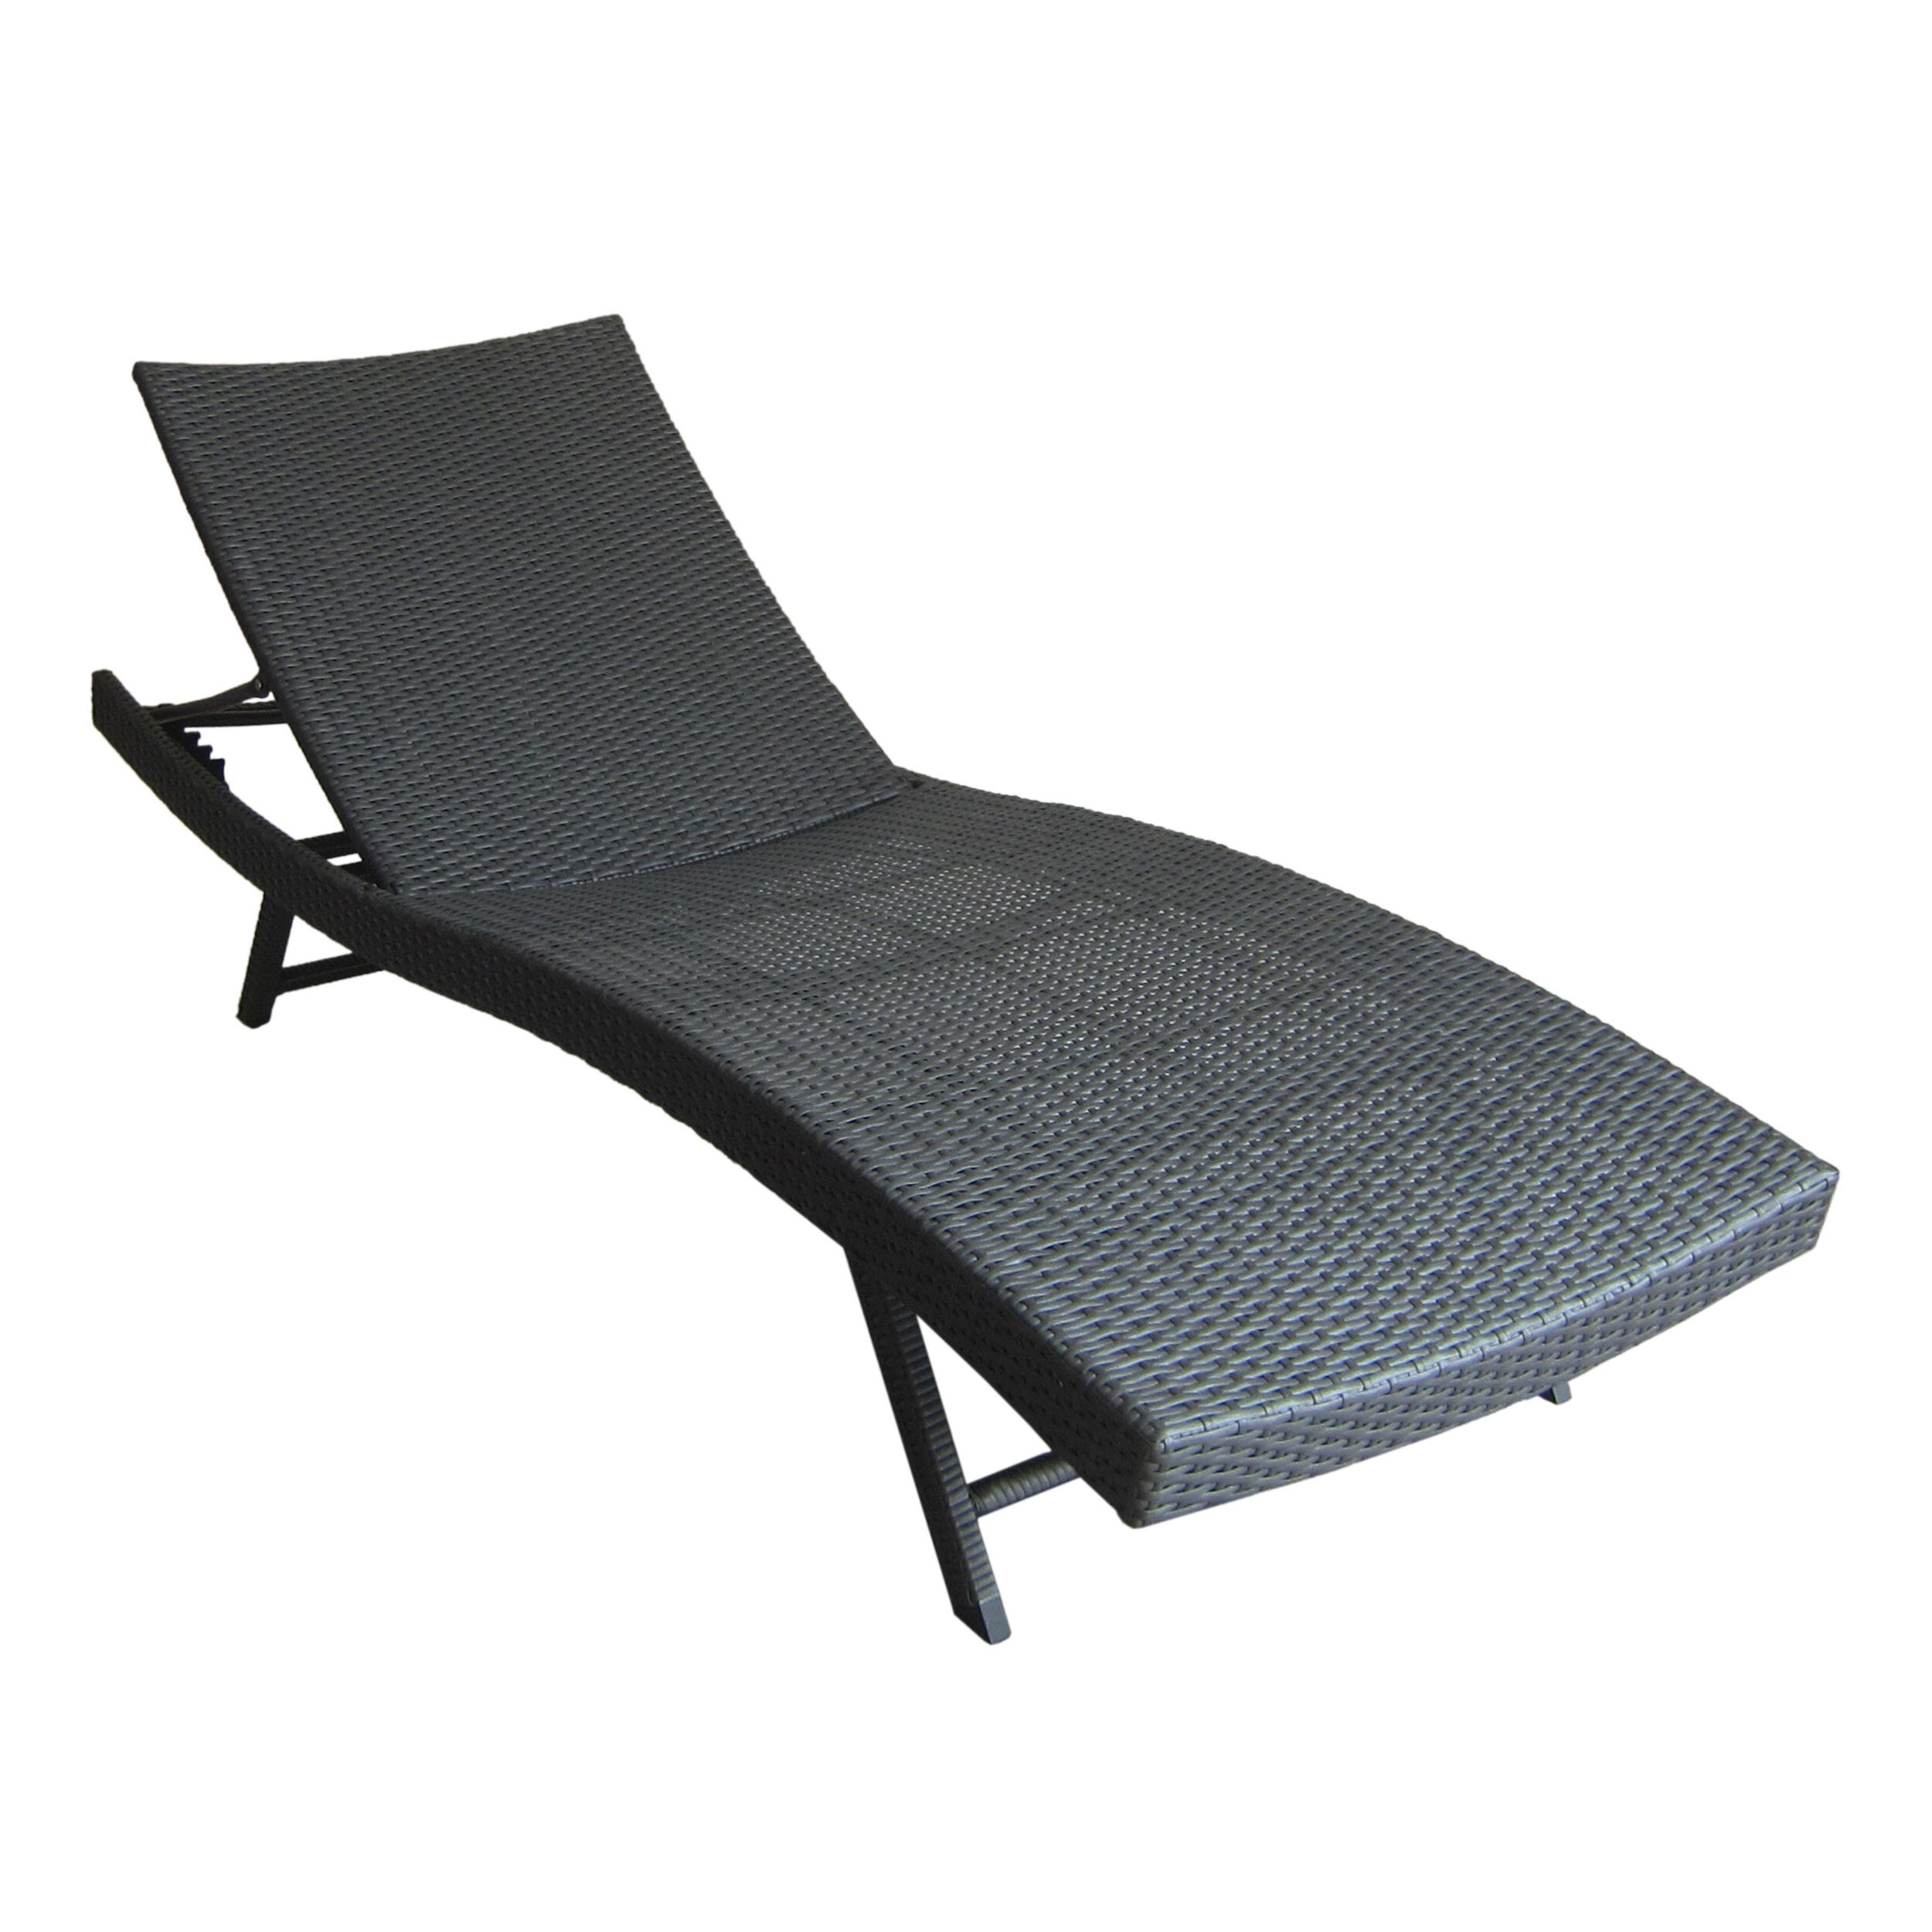 Newest Gerson Outdoor Wicker Reclining Chaise Lounge Regarding Curved Folding Chaise Loungers (View 21 of 25)